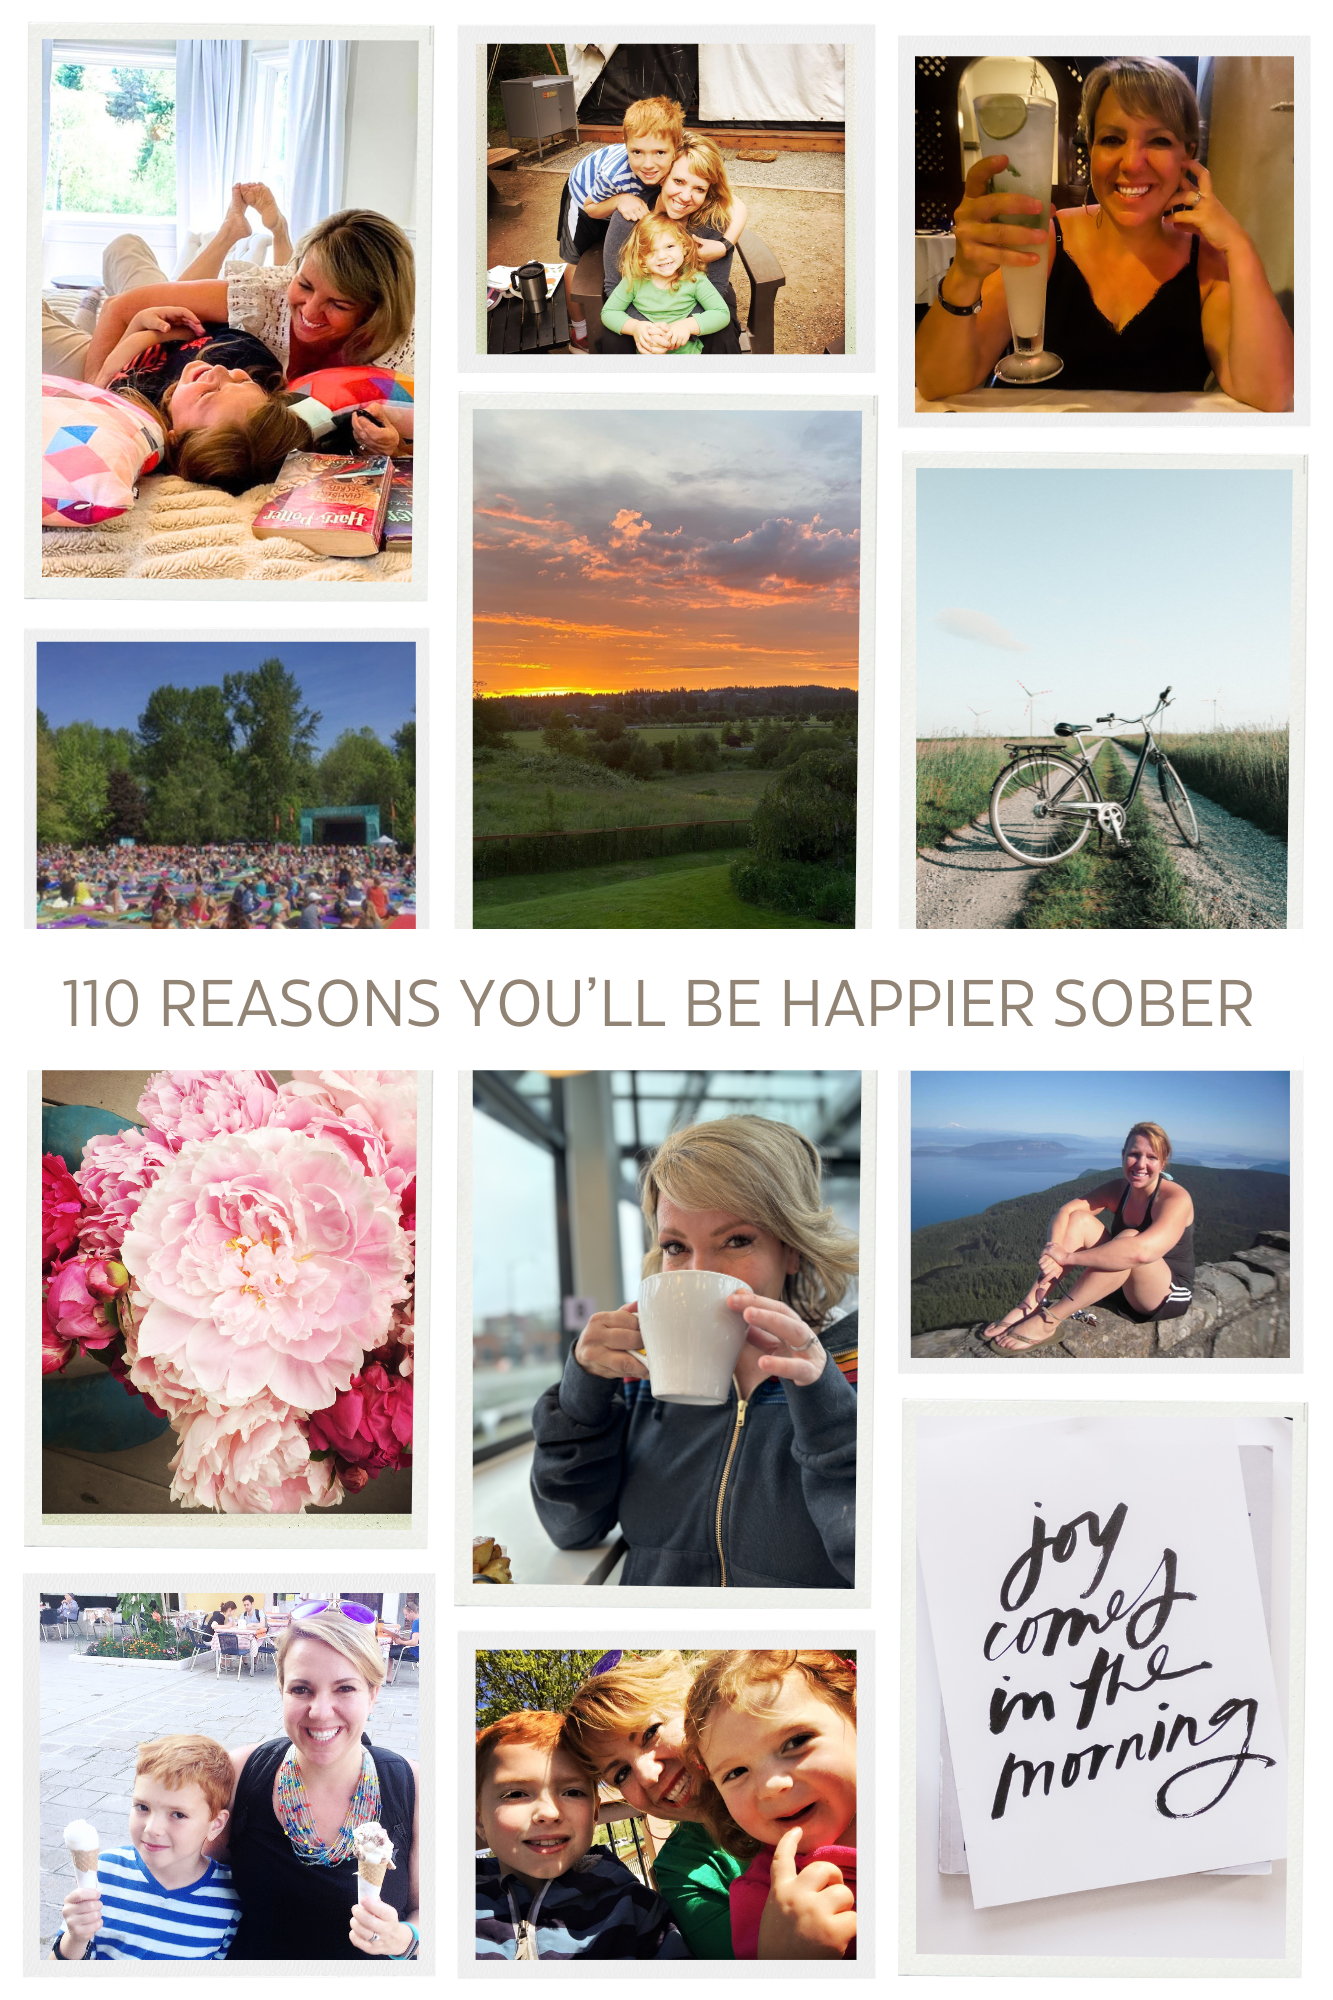 Sober Curious? Here are 110 reasons that you'll be happier sober.